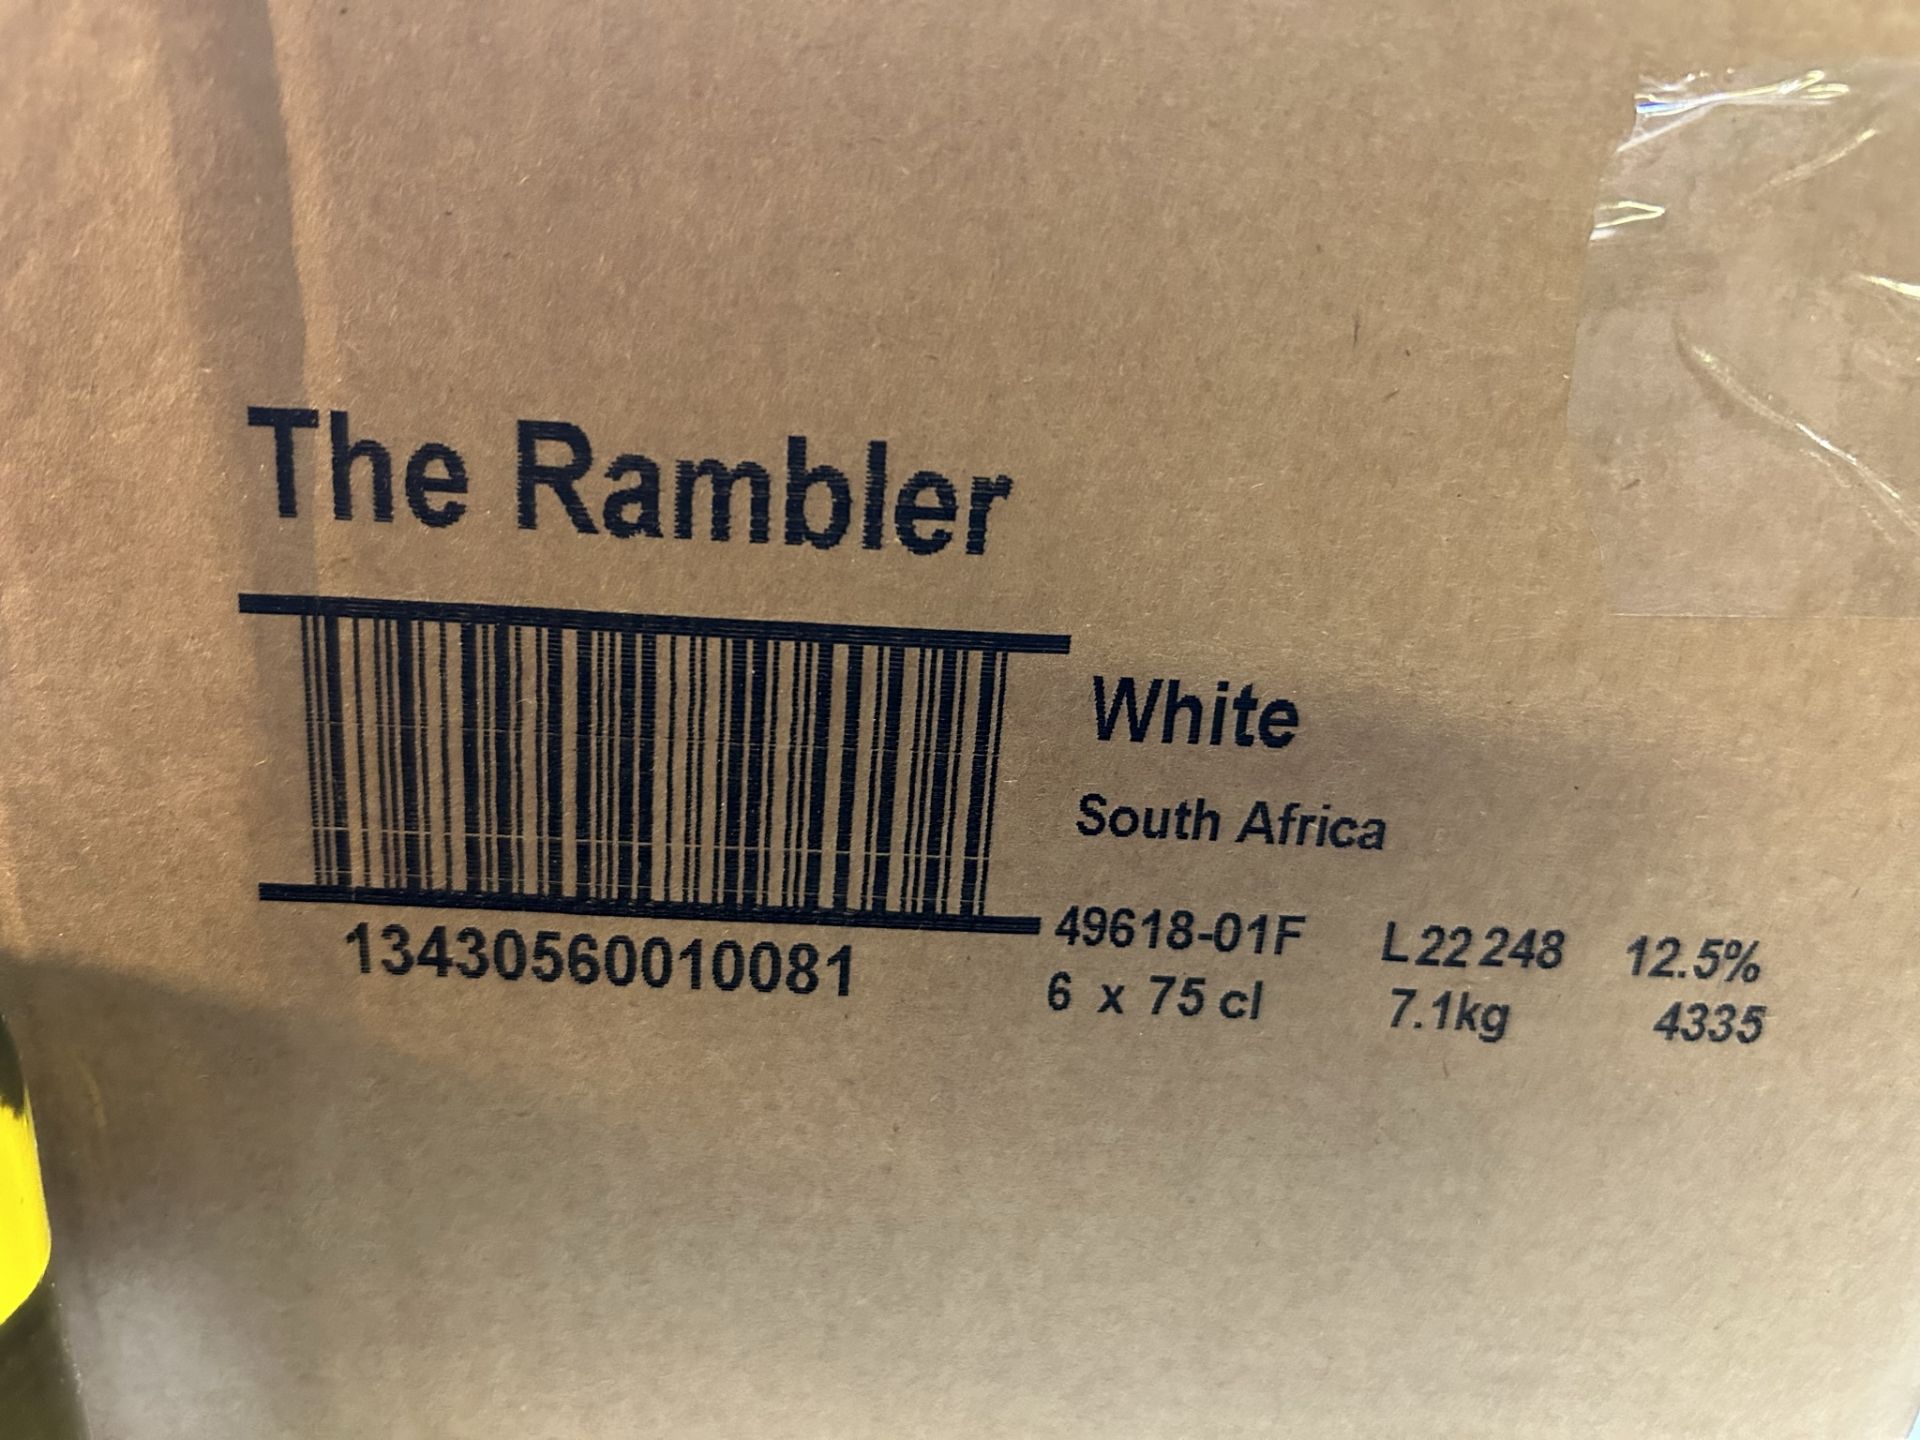 5 x Crates of The Rambler White Wine & 23 x Loose Bottles (53 x Bottles in Total) - Image 3 of 3